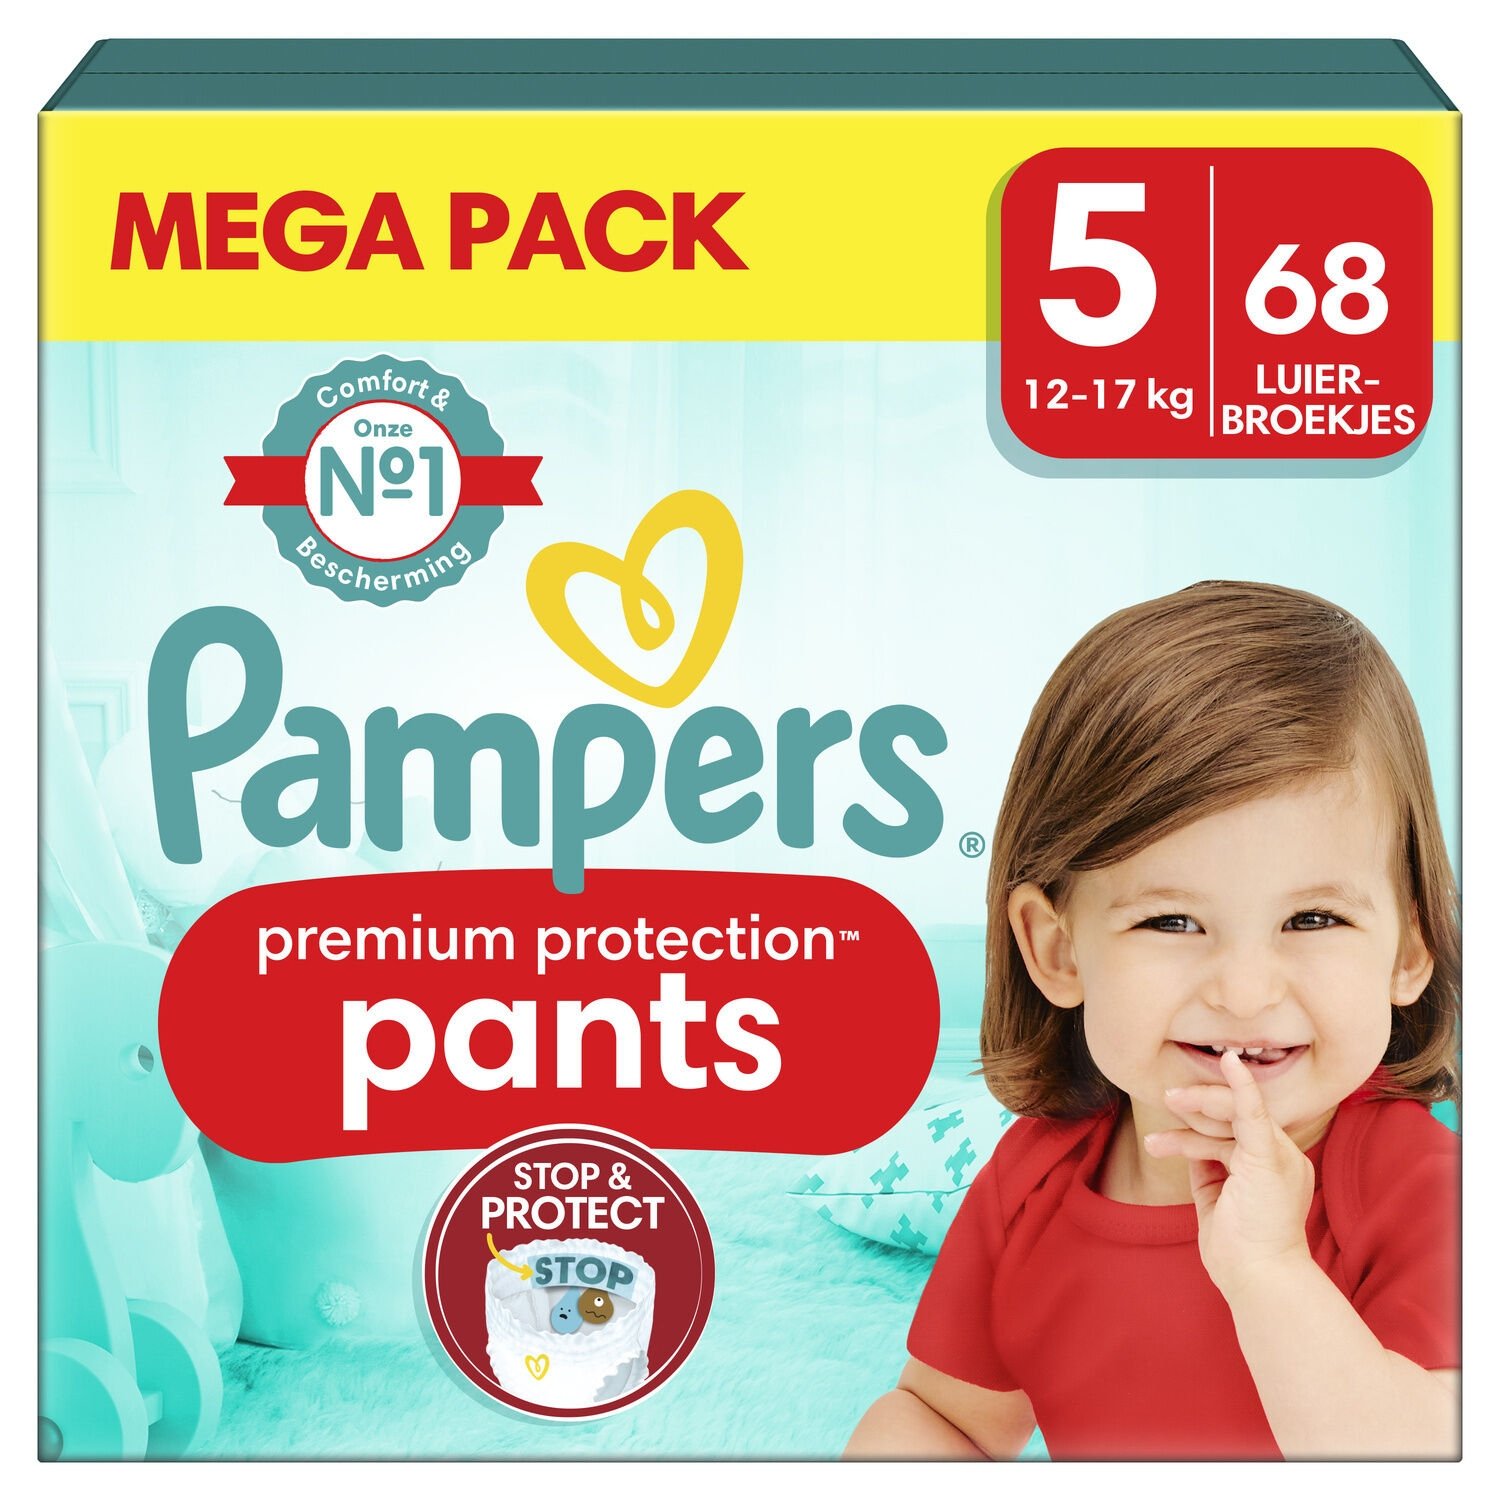 pampers pants premium care 4 akce